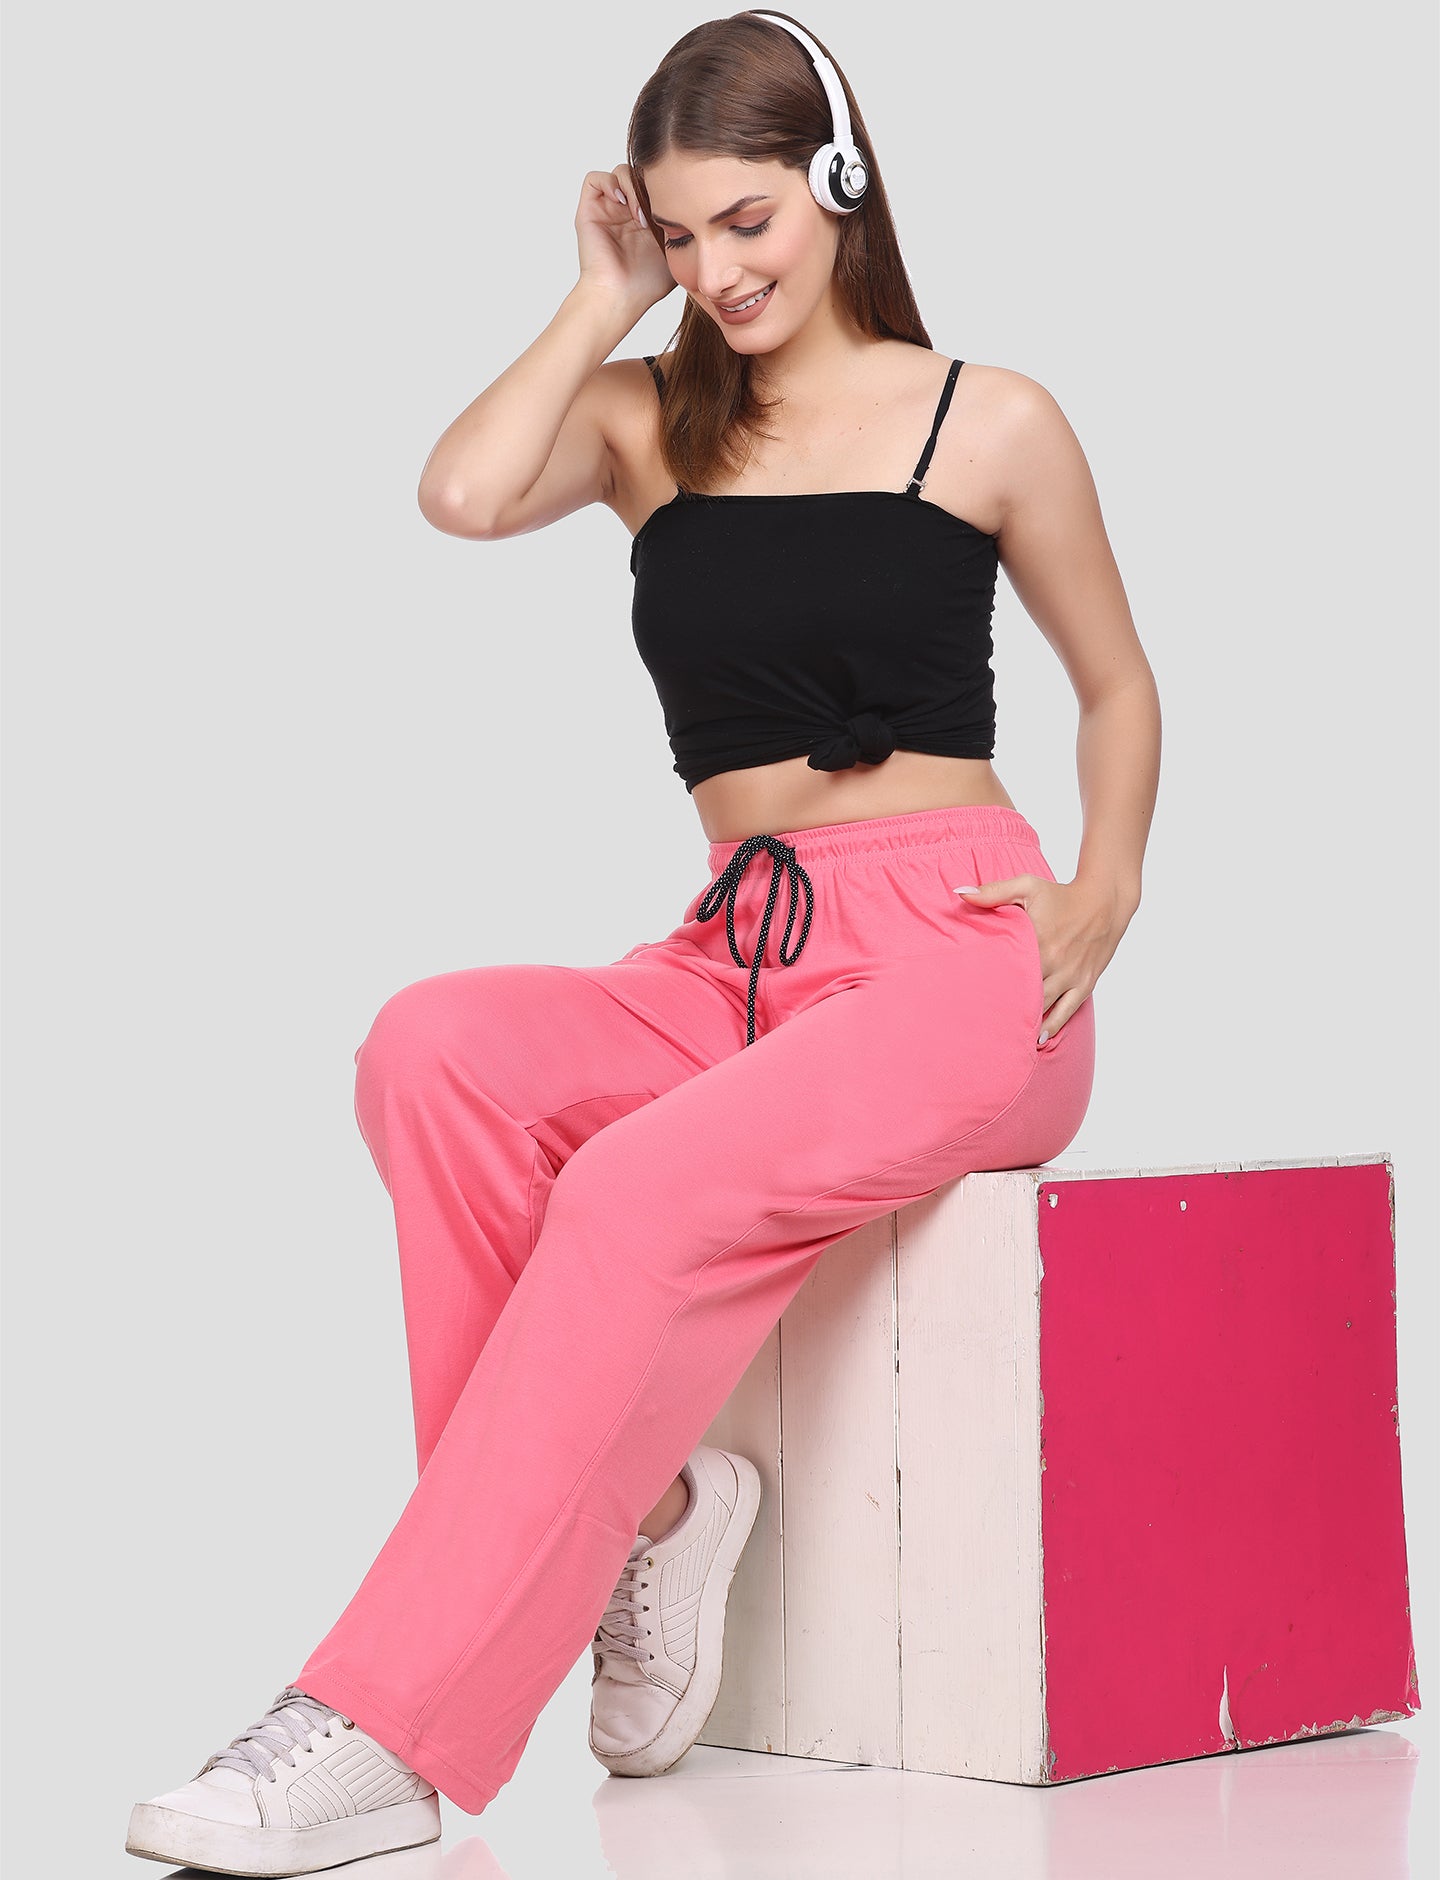 Comfortable High Waist Cotton Flared Pants For Women in Flare Pink online at best prices